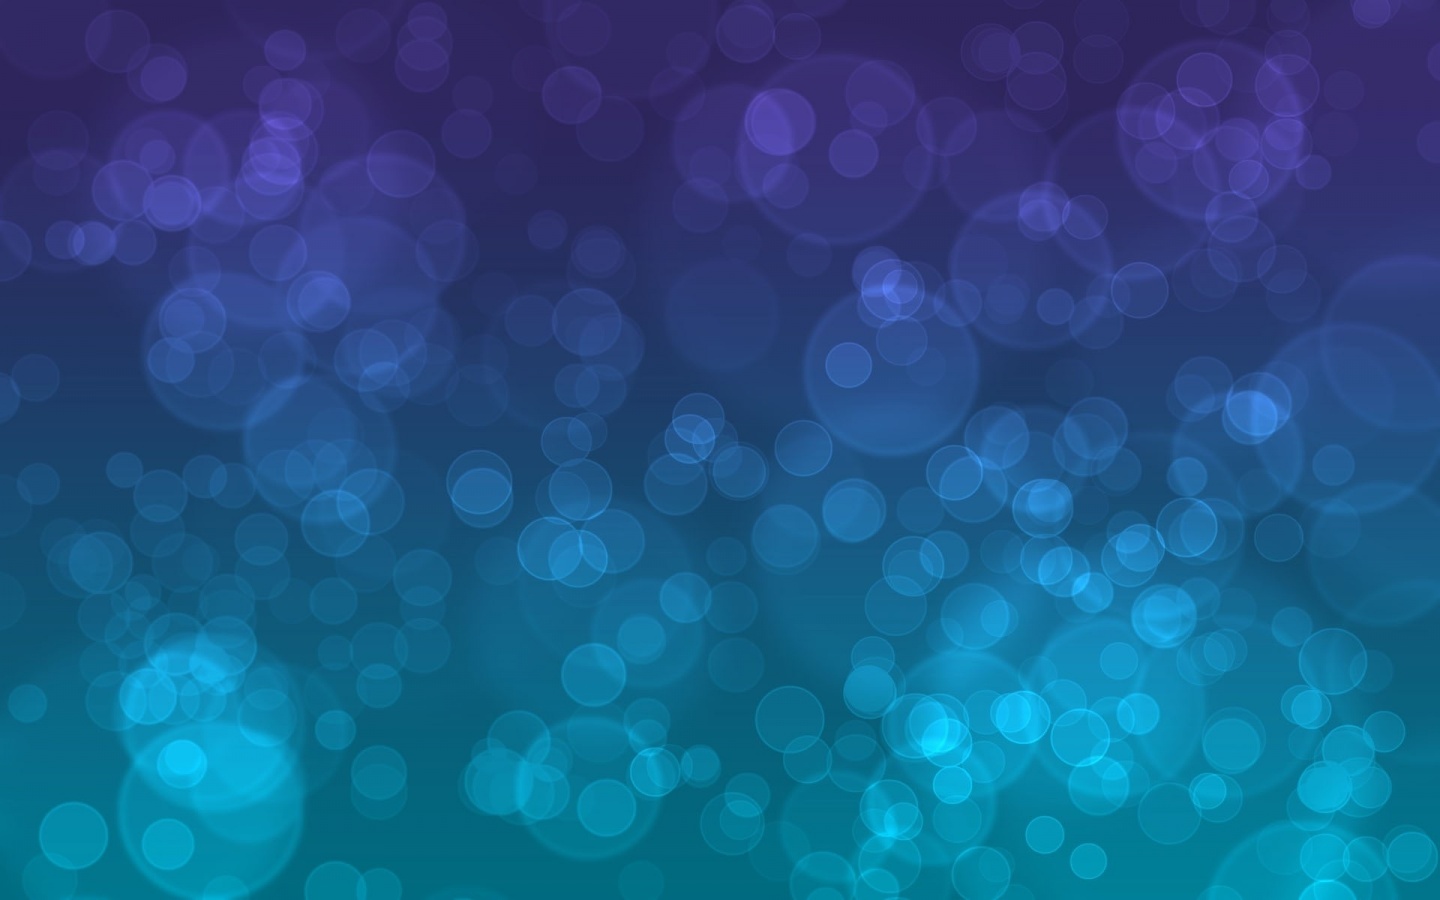 Purple and Teal Wallpaper